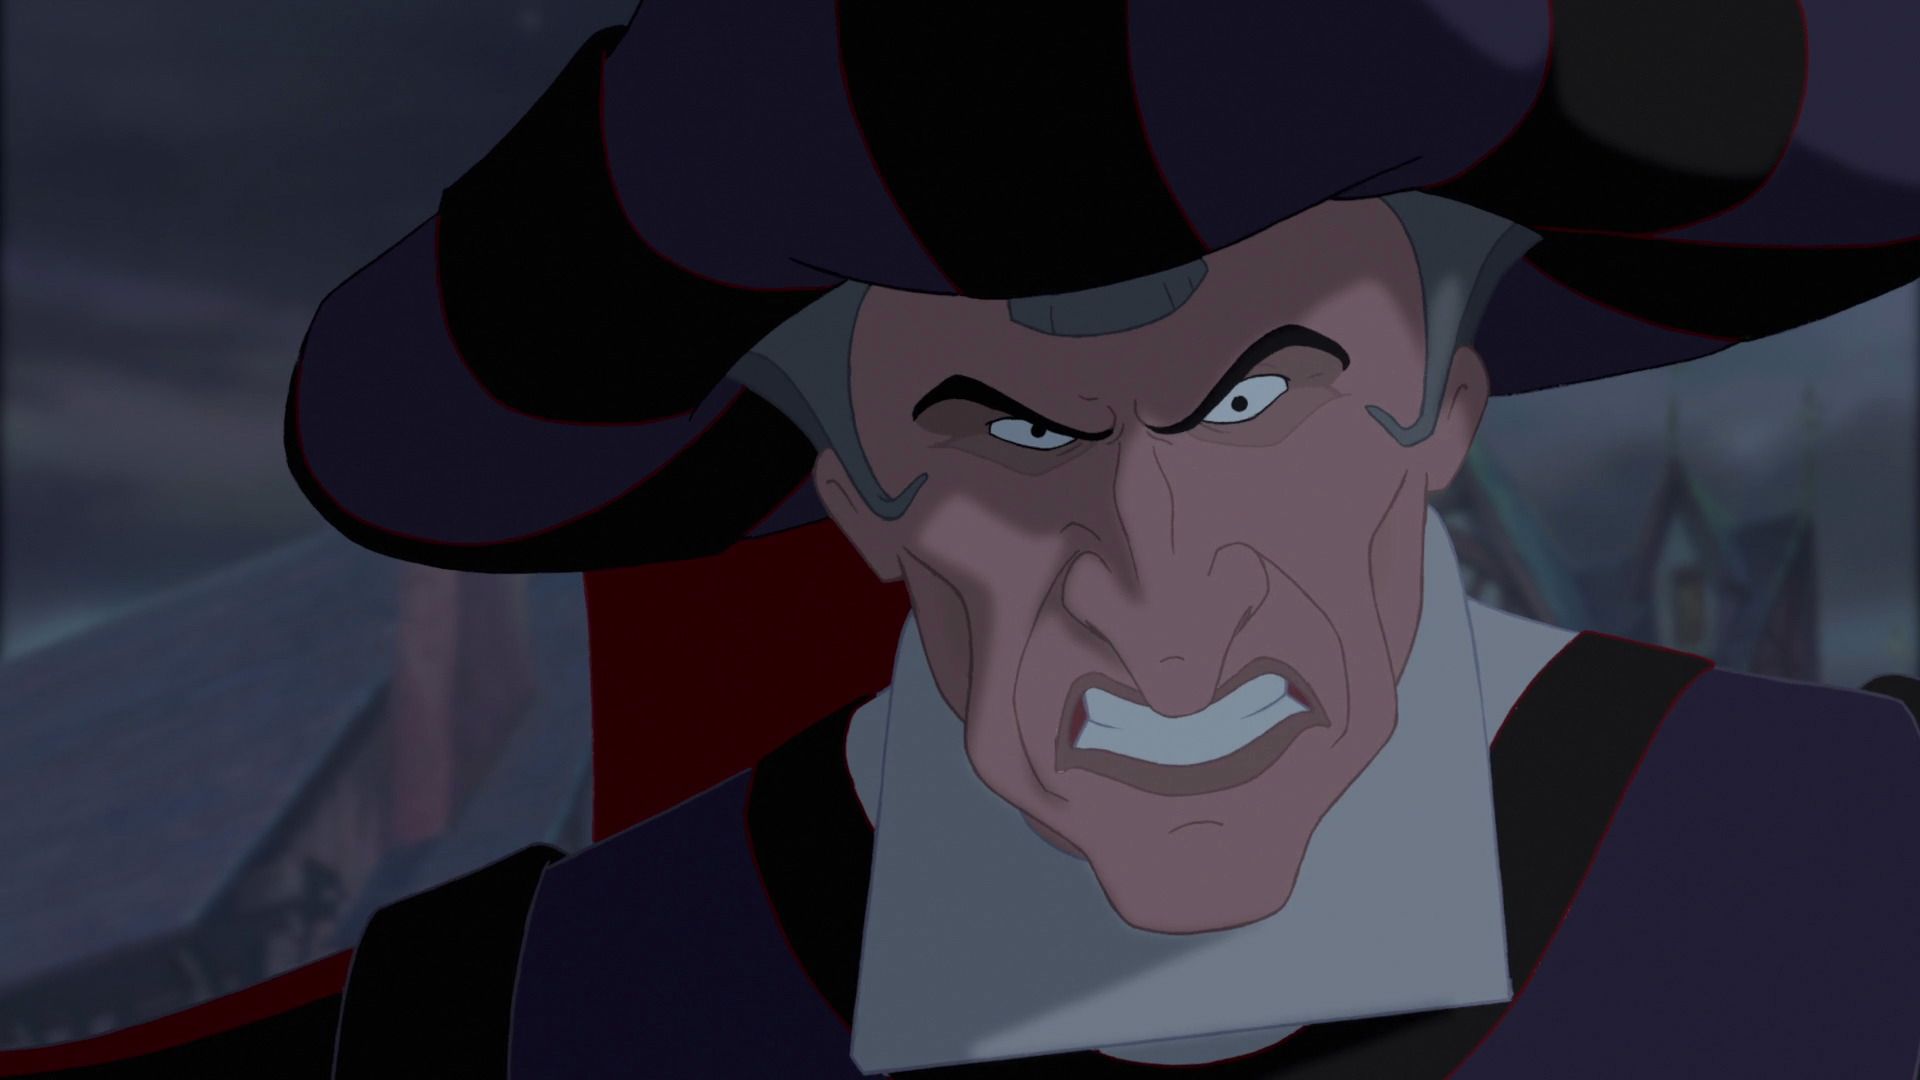 Judge Claude Frollo from Disney's The Hunchback of Notre Dame